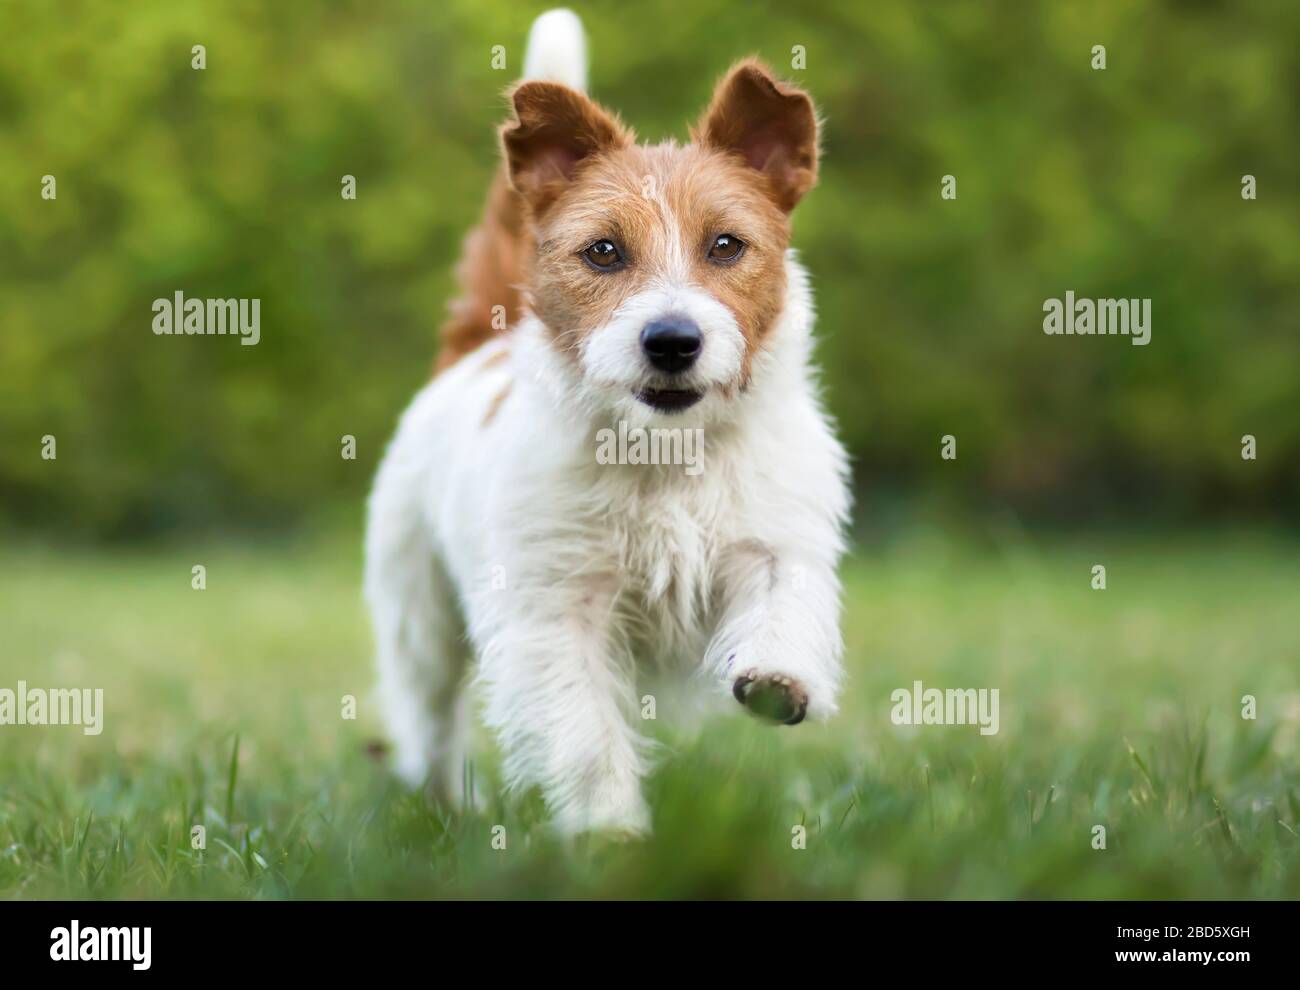 Pet training concept, obedient small dog walking in the grass Stock Photo